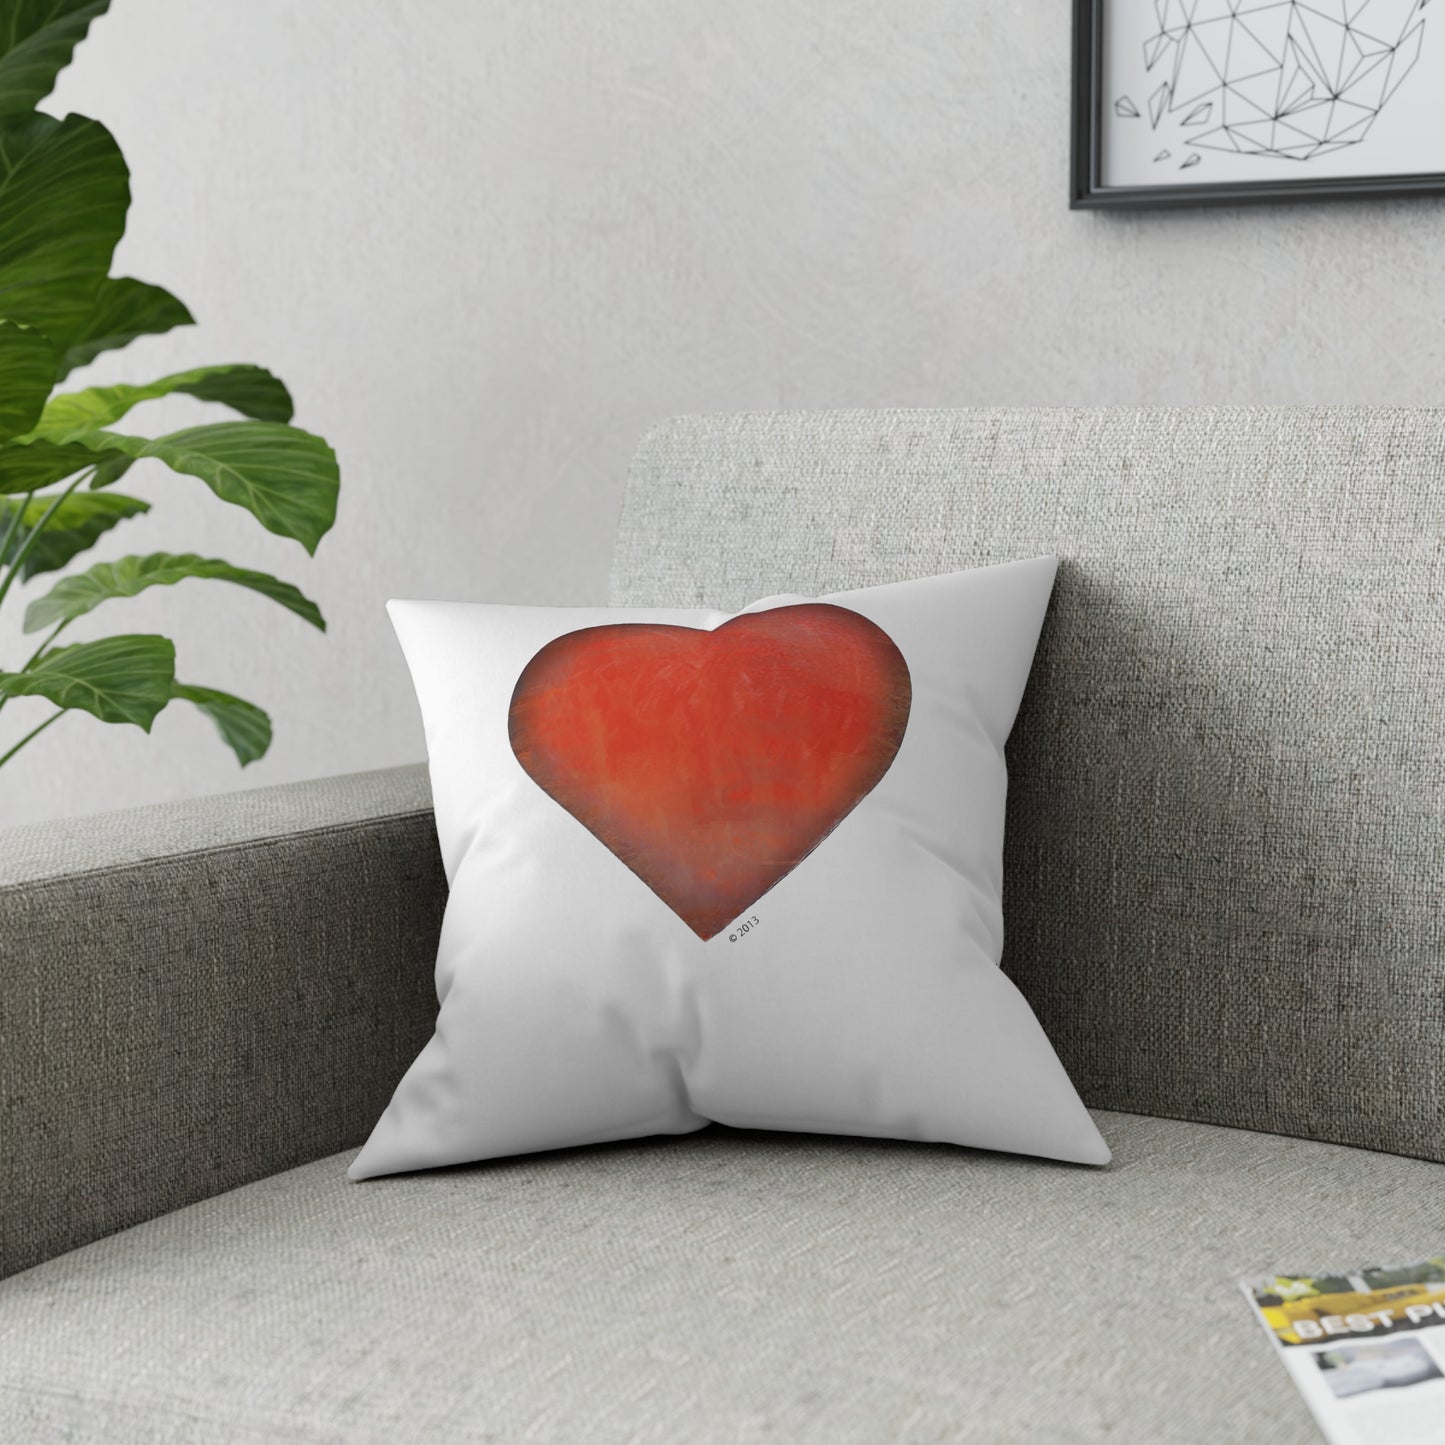 Red Throw Pillow - Colorful Throw Pillow - Heart Throw Pillow for couch, sofa or bed